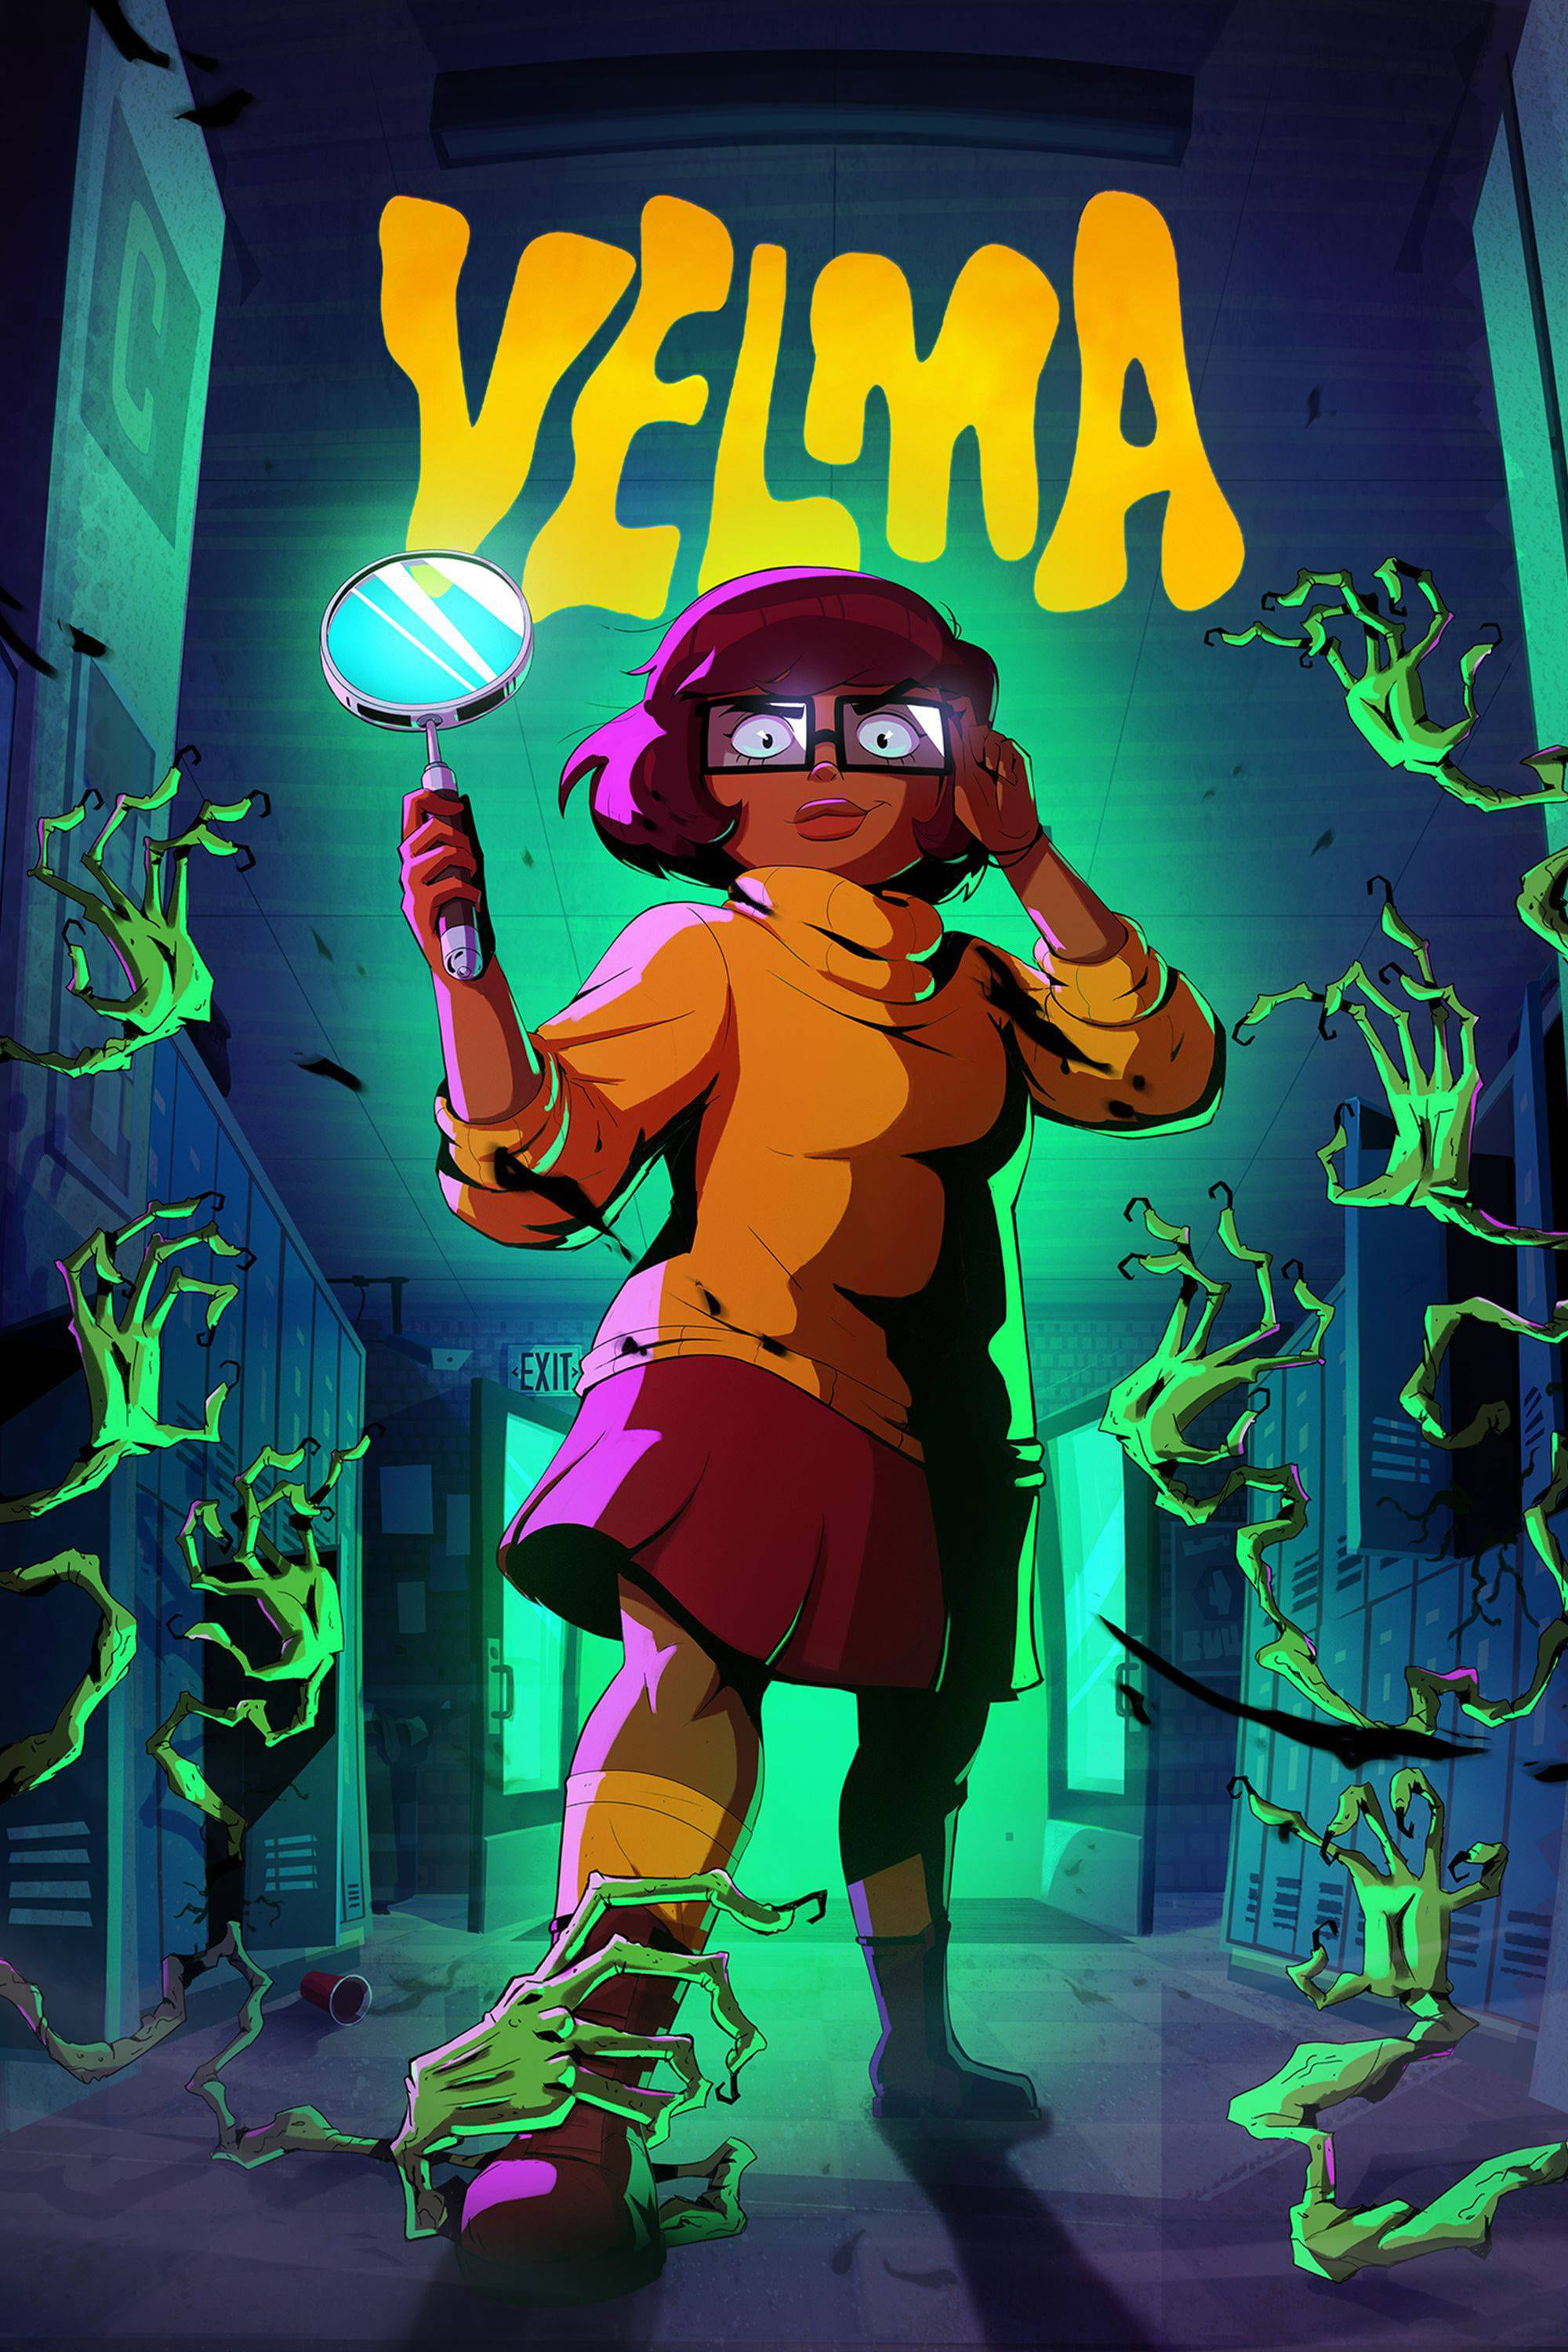 Velma TV Shows About Serial Killer